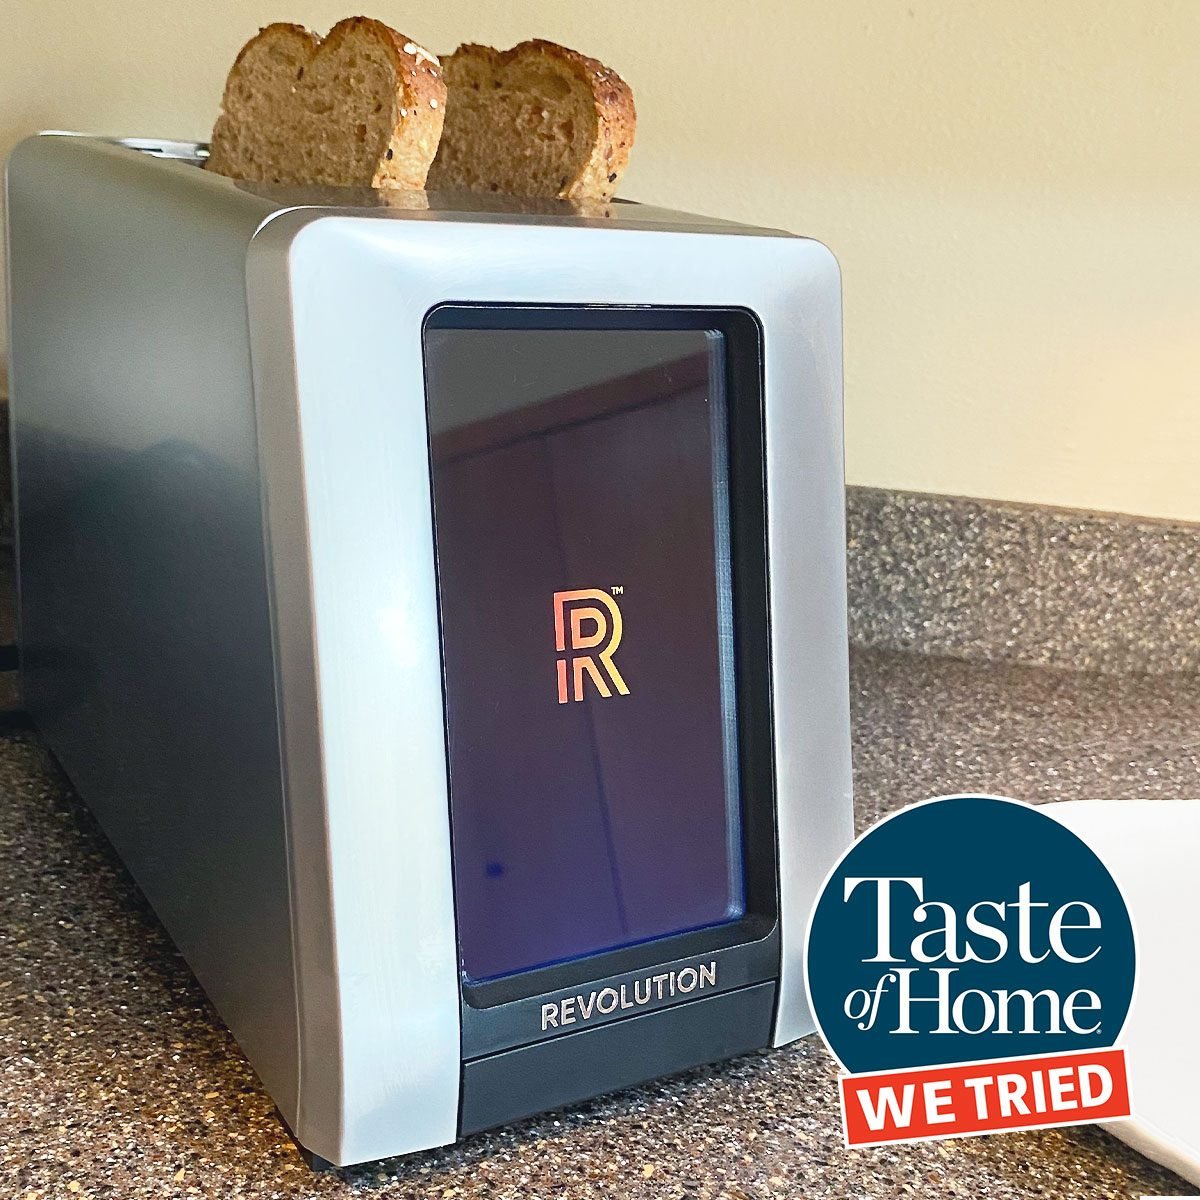 The Revolution R180 InstaGlo Toaster Is a Breakfast Game-Changer